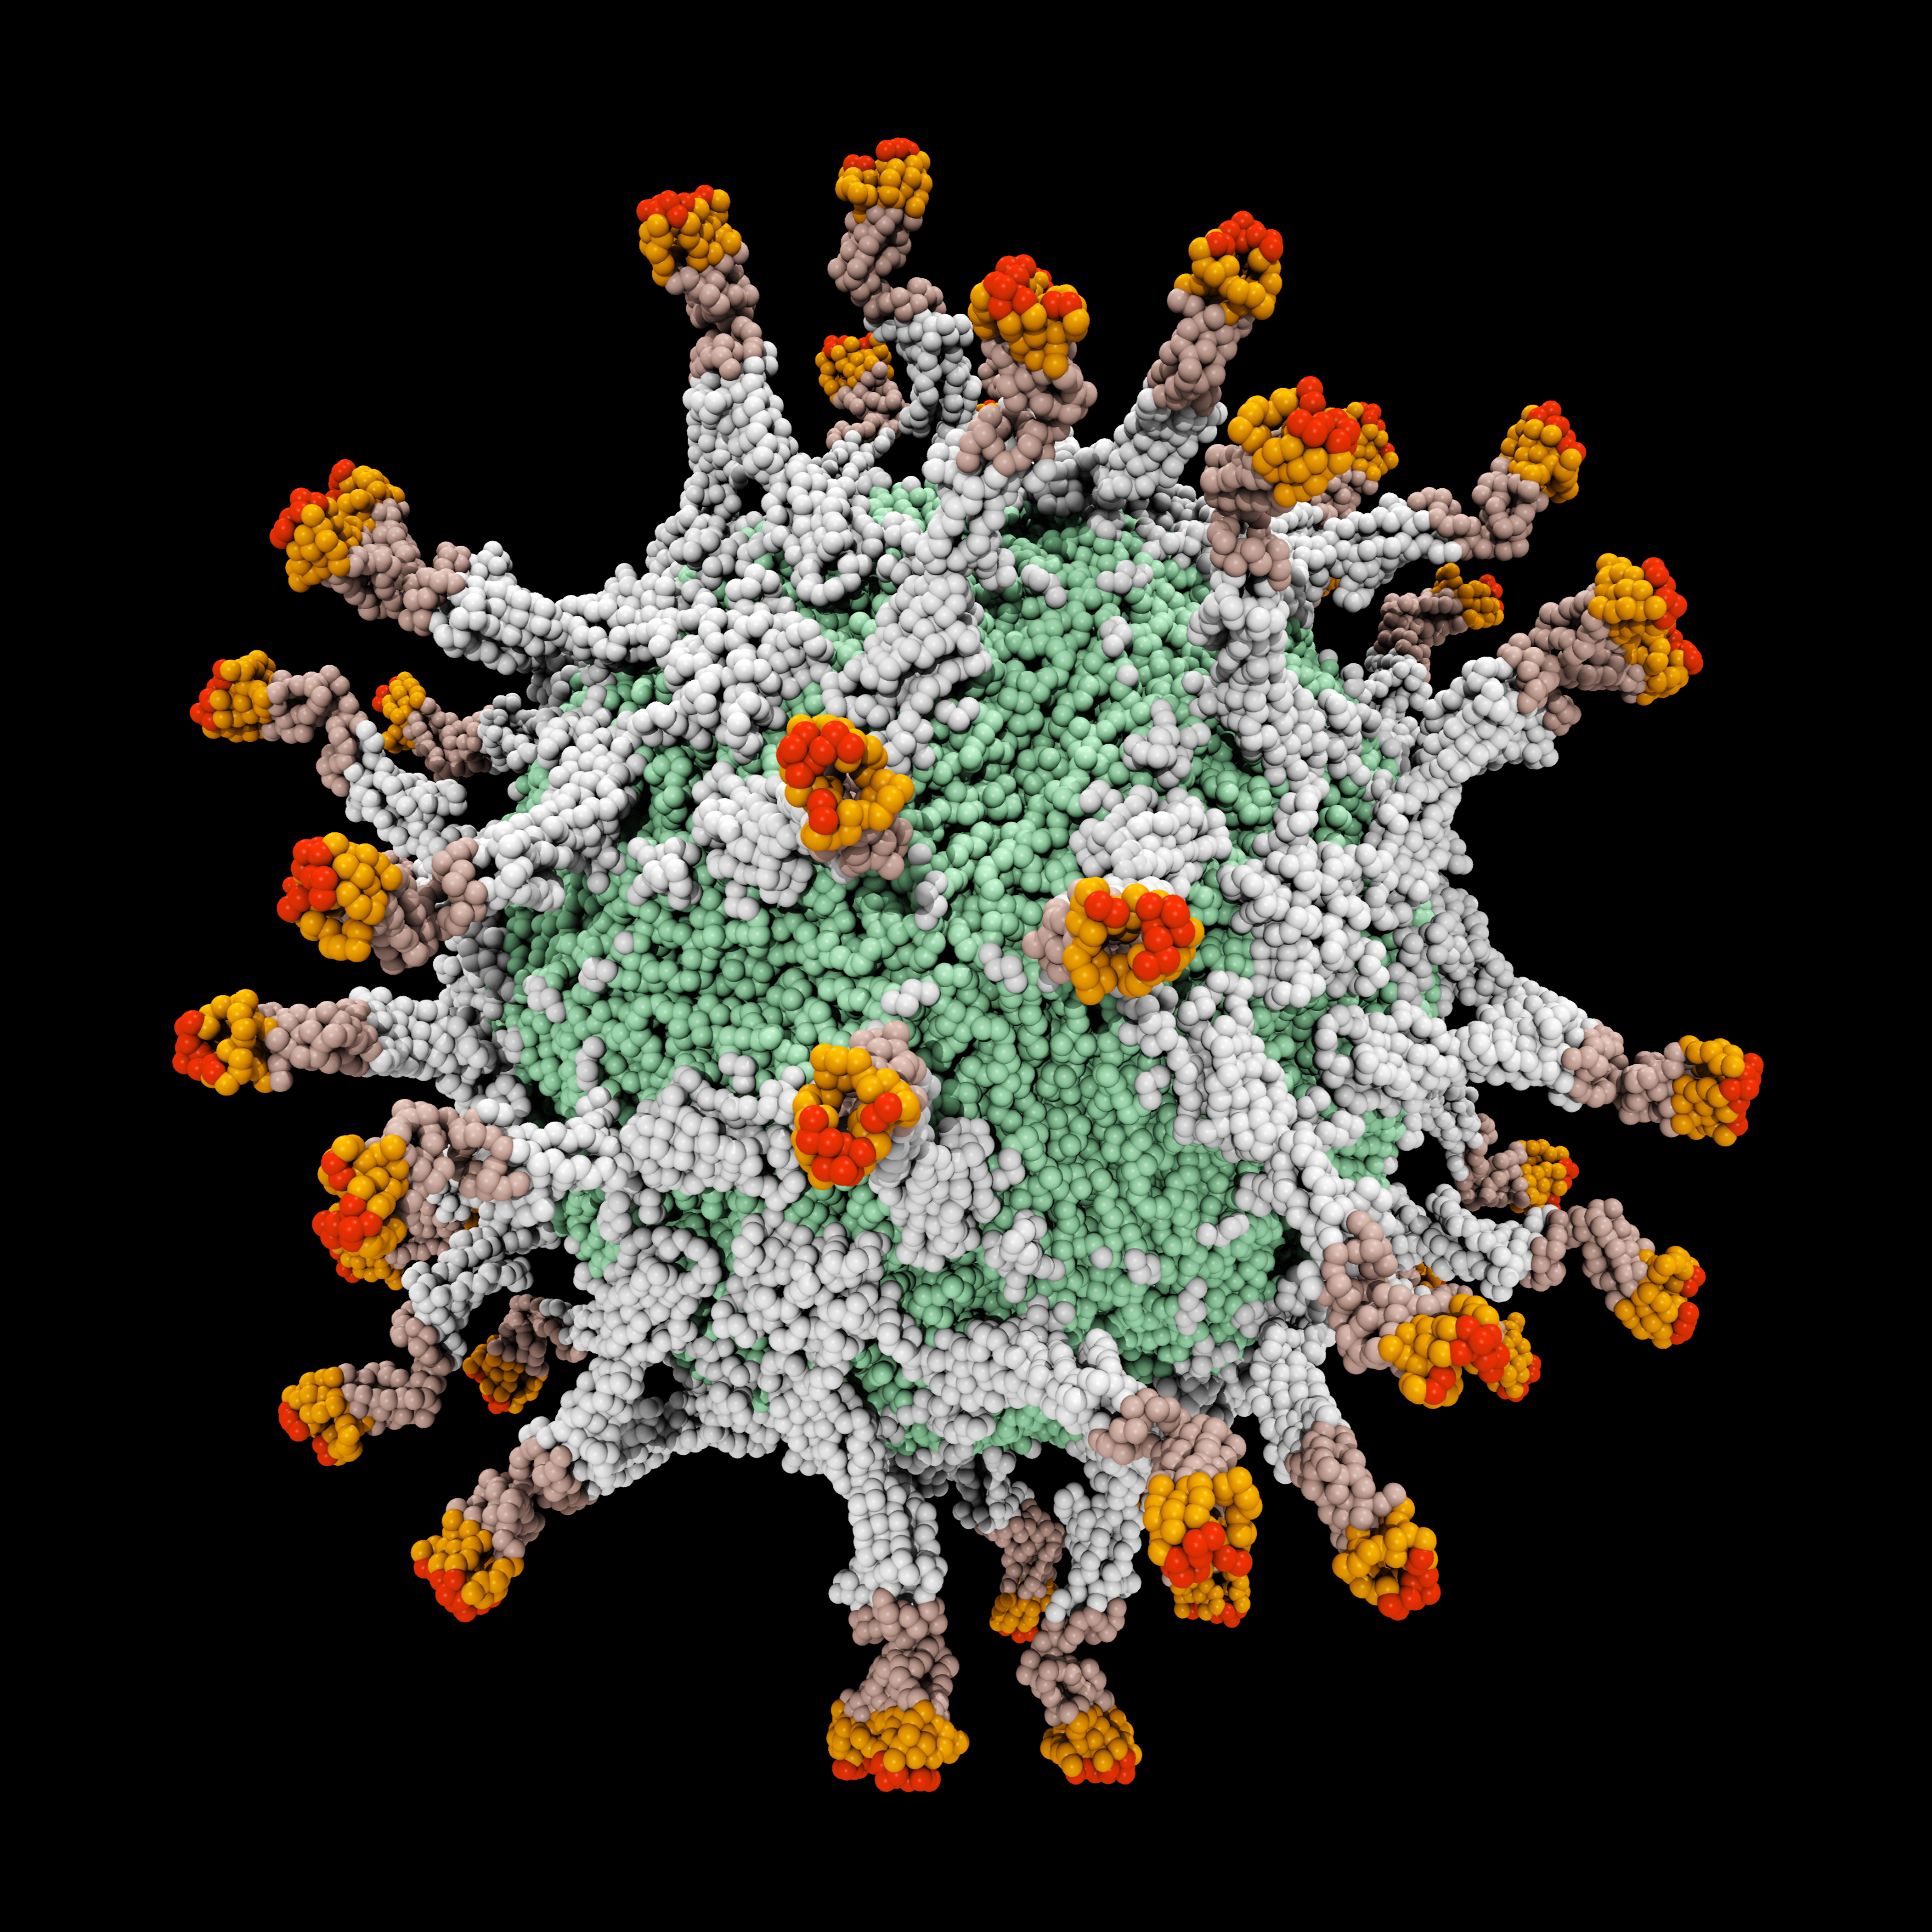 A digitally generated image of the poliovirus (Getty Images/Tetra images RF)